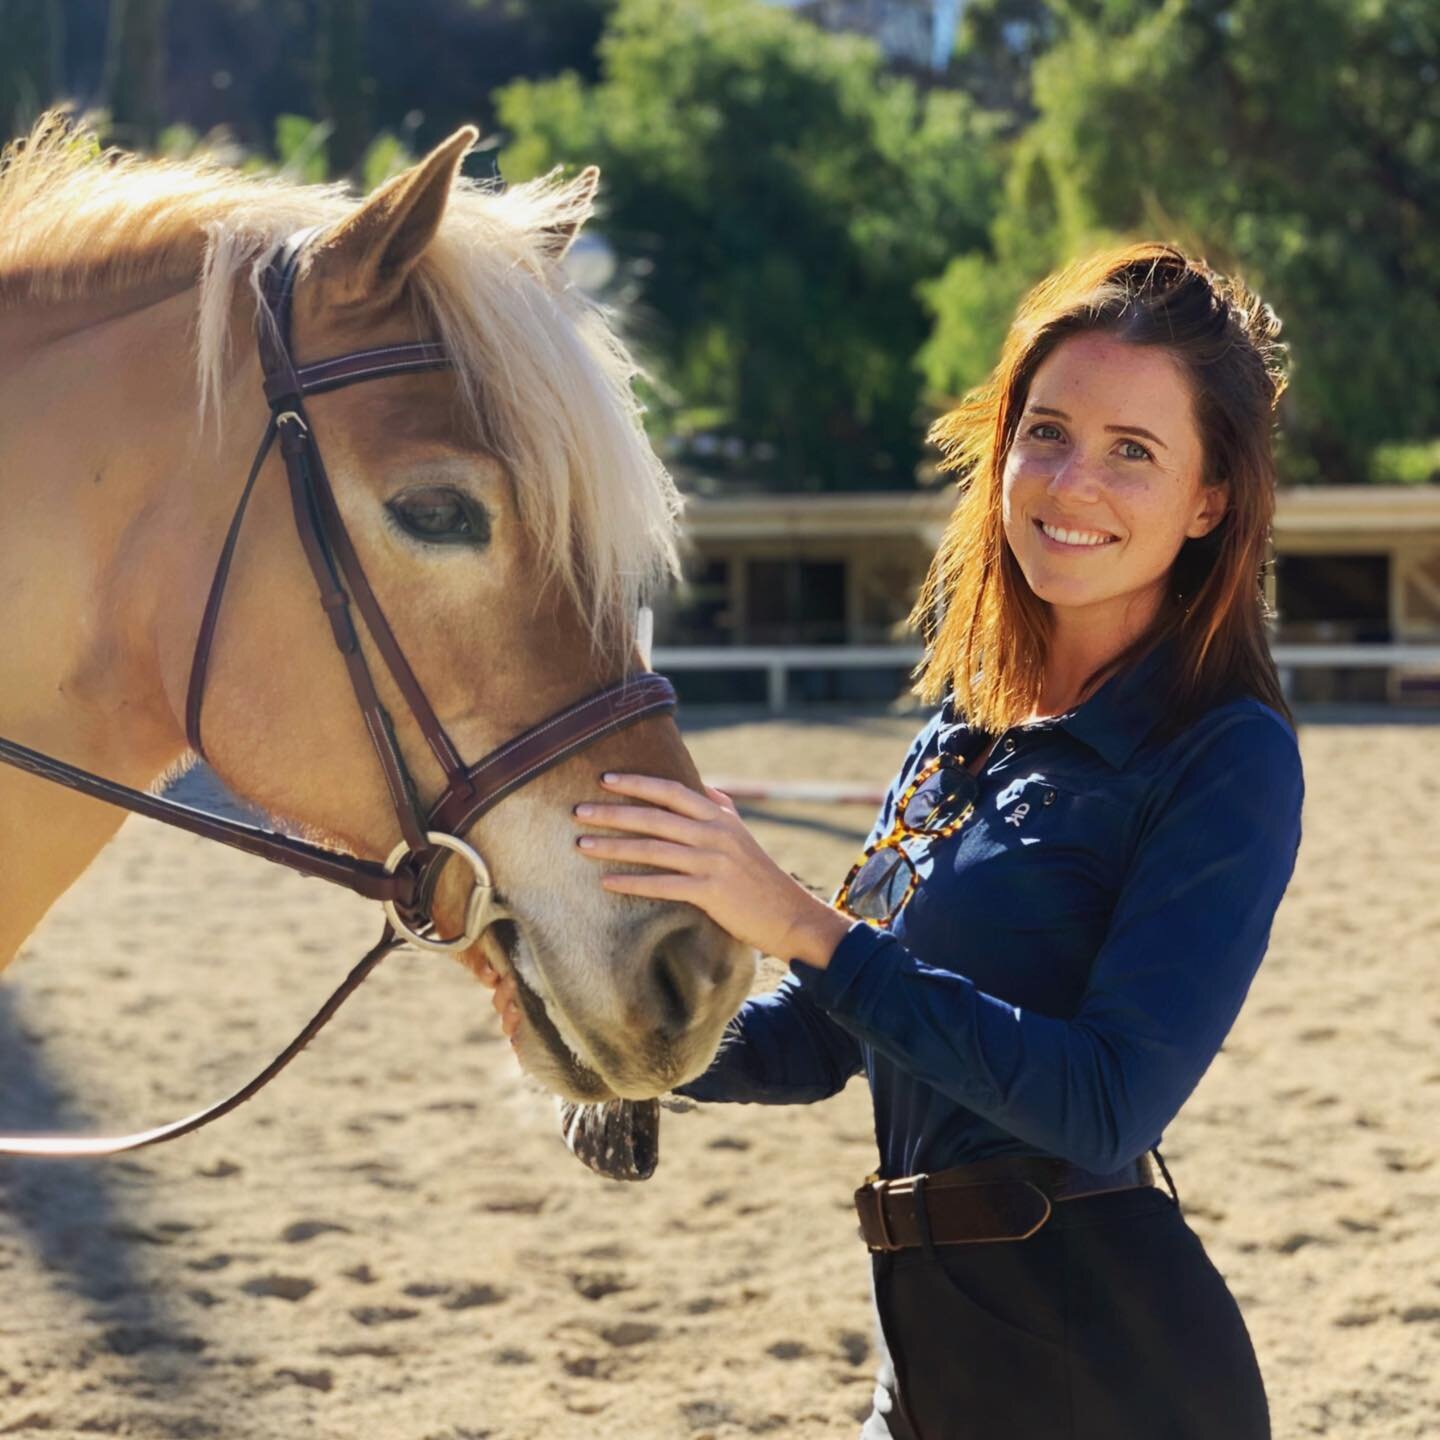 We are so excited to officially welcome Kaylee as our newest FWF trainer! You can catch Kaylee in the lower ring with our beginners thru amateur adults, or snuggling up with our school horses in between lessons 🤍 Looking forward to lots of fun lesso